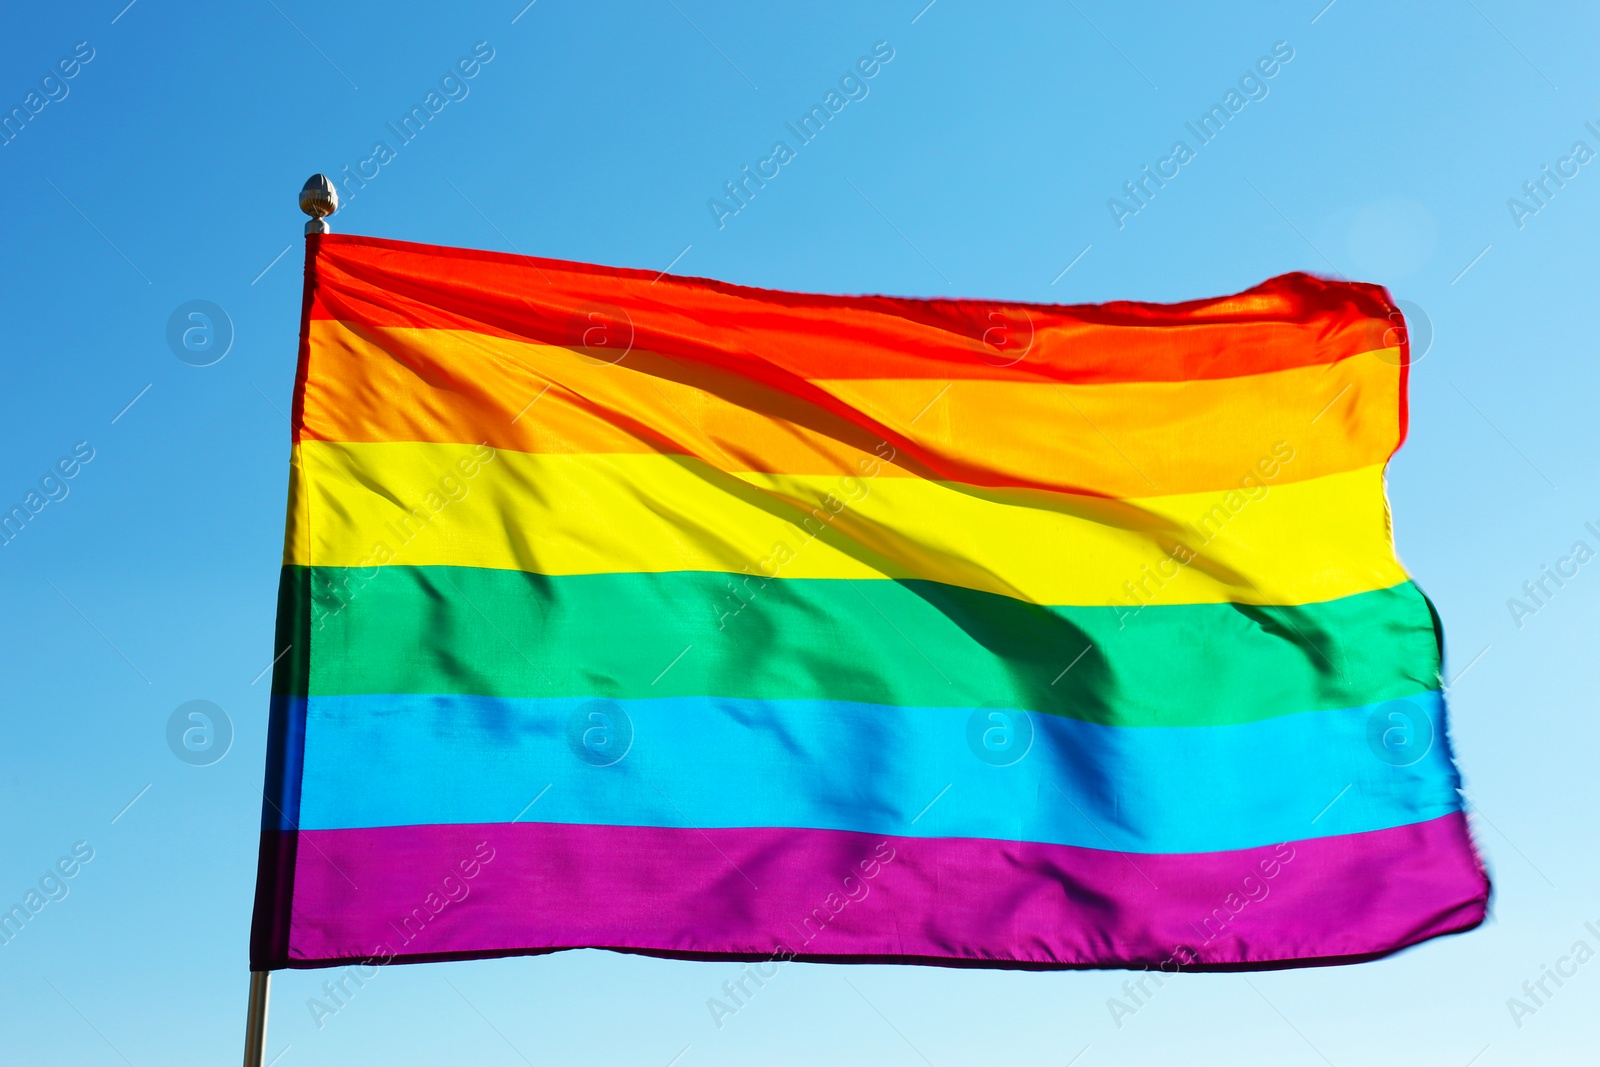 Photo of Rainbow LGBT flag fluttering on blue sky background. Gay rights movement